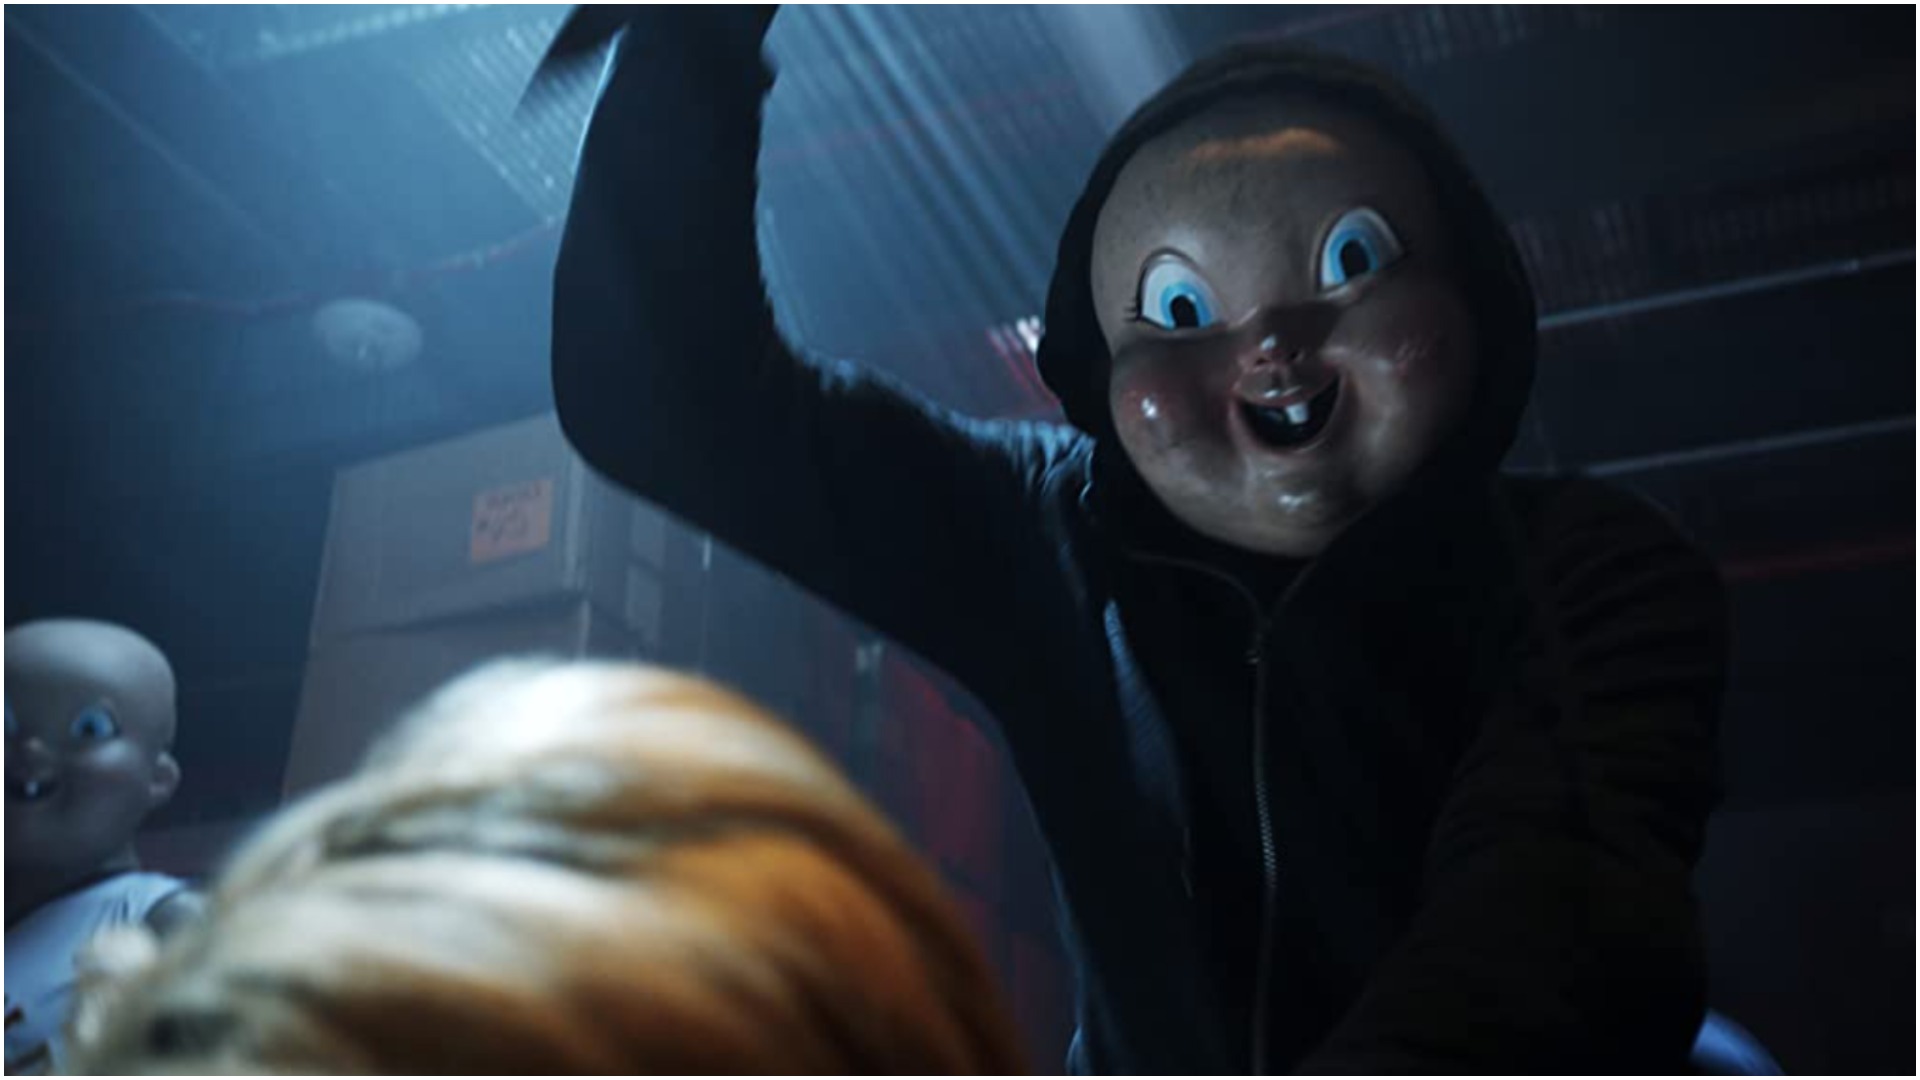 Happy Death Day 3 is “all figured out,” says star but “Blumhouse and Universal [need] to get their ducks in a row”